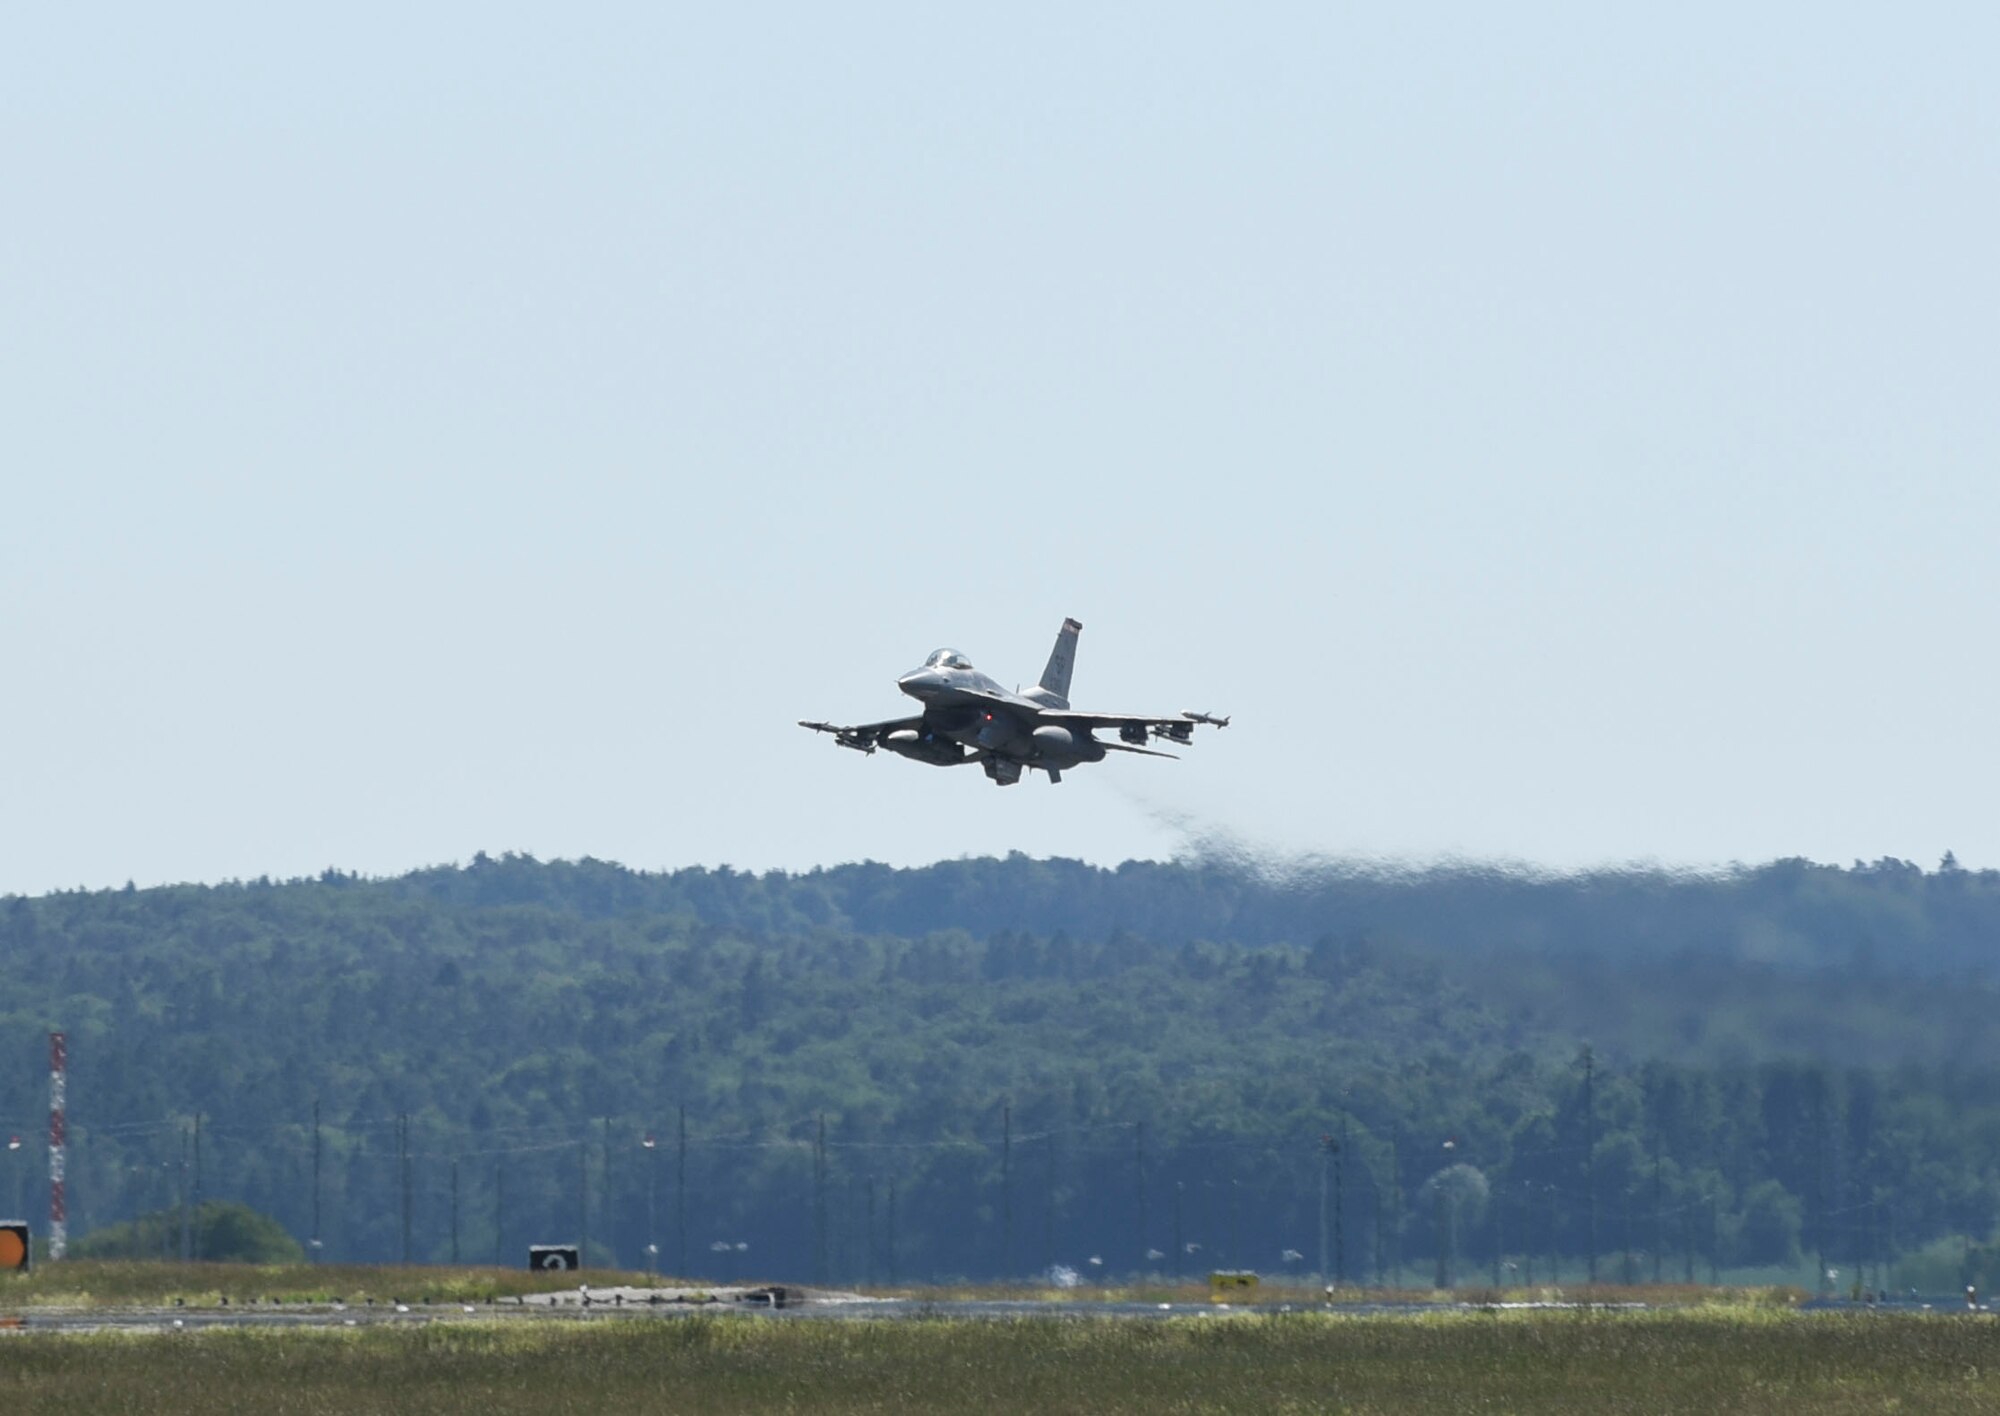 A U.S. Air Force F-16 Fighting Falcon, assigned to the 480th Fighter Squadron, begins to land at Spangdahlem Air Base, Germany, after participating in a large force exercise within the North Sea airspace, U.K., May 27, 2020. LFE’s sharpen combat readiness, increase tactical proficiency, and demonstrate the U.S. commitment to regional security. (U.S. Air Force photo by Senior Airman Melody W. Howley)